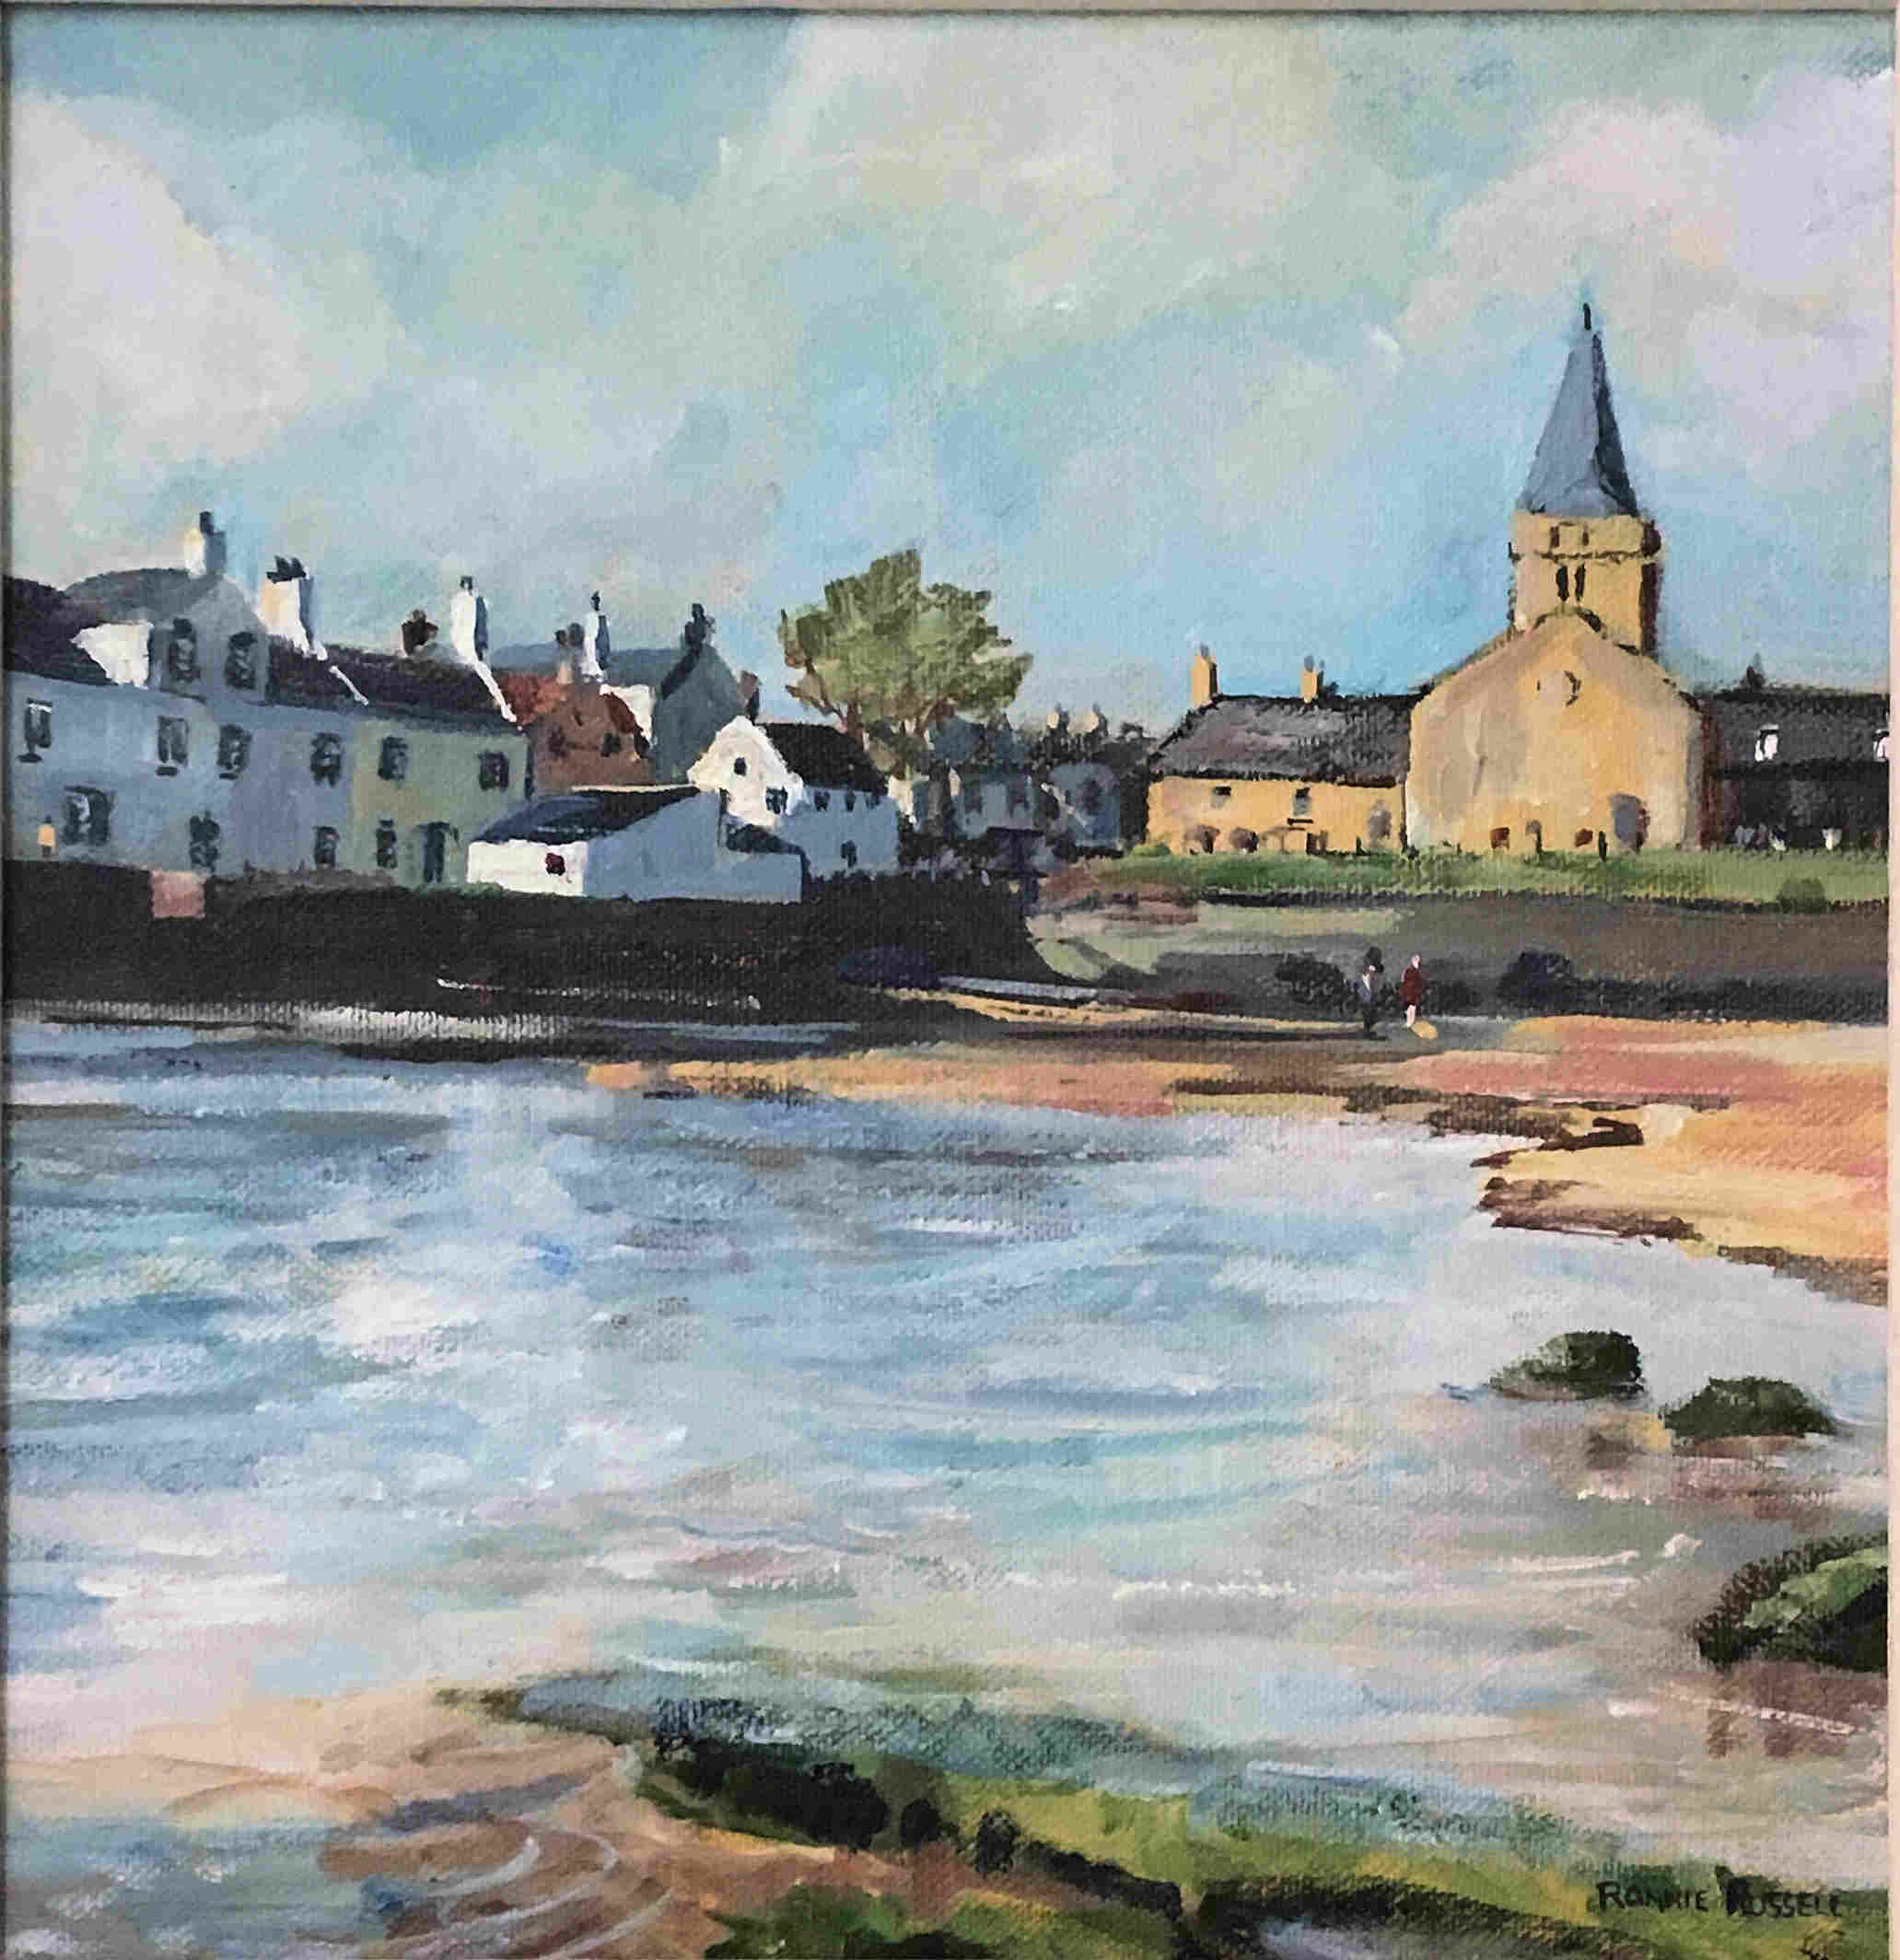 'Spring Sun, Anstruther' by artist Ronnie Russell